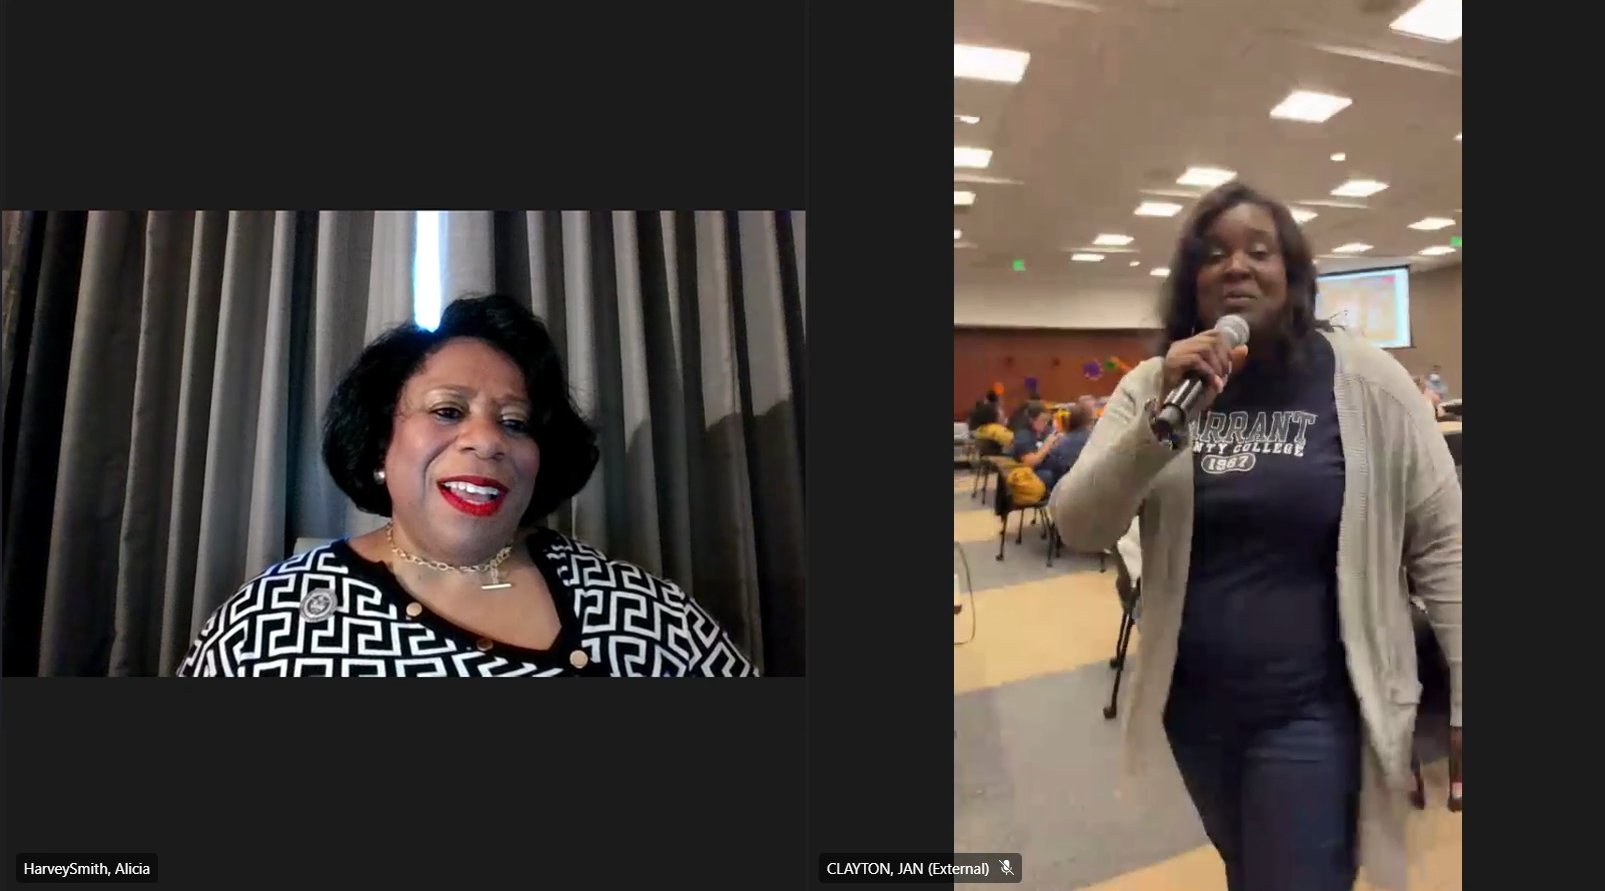 A photo taken during Dr. Alicia B. Harvey-Smith's virtual presentation at the Student Affairs Retreat taking place at Tarrant County College.